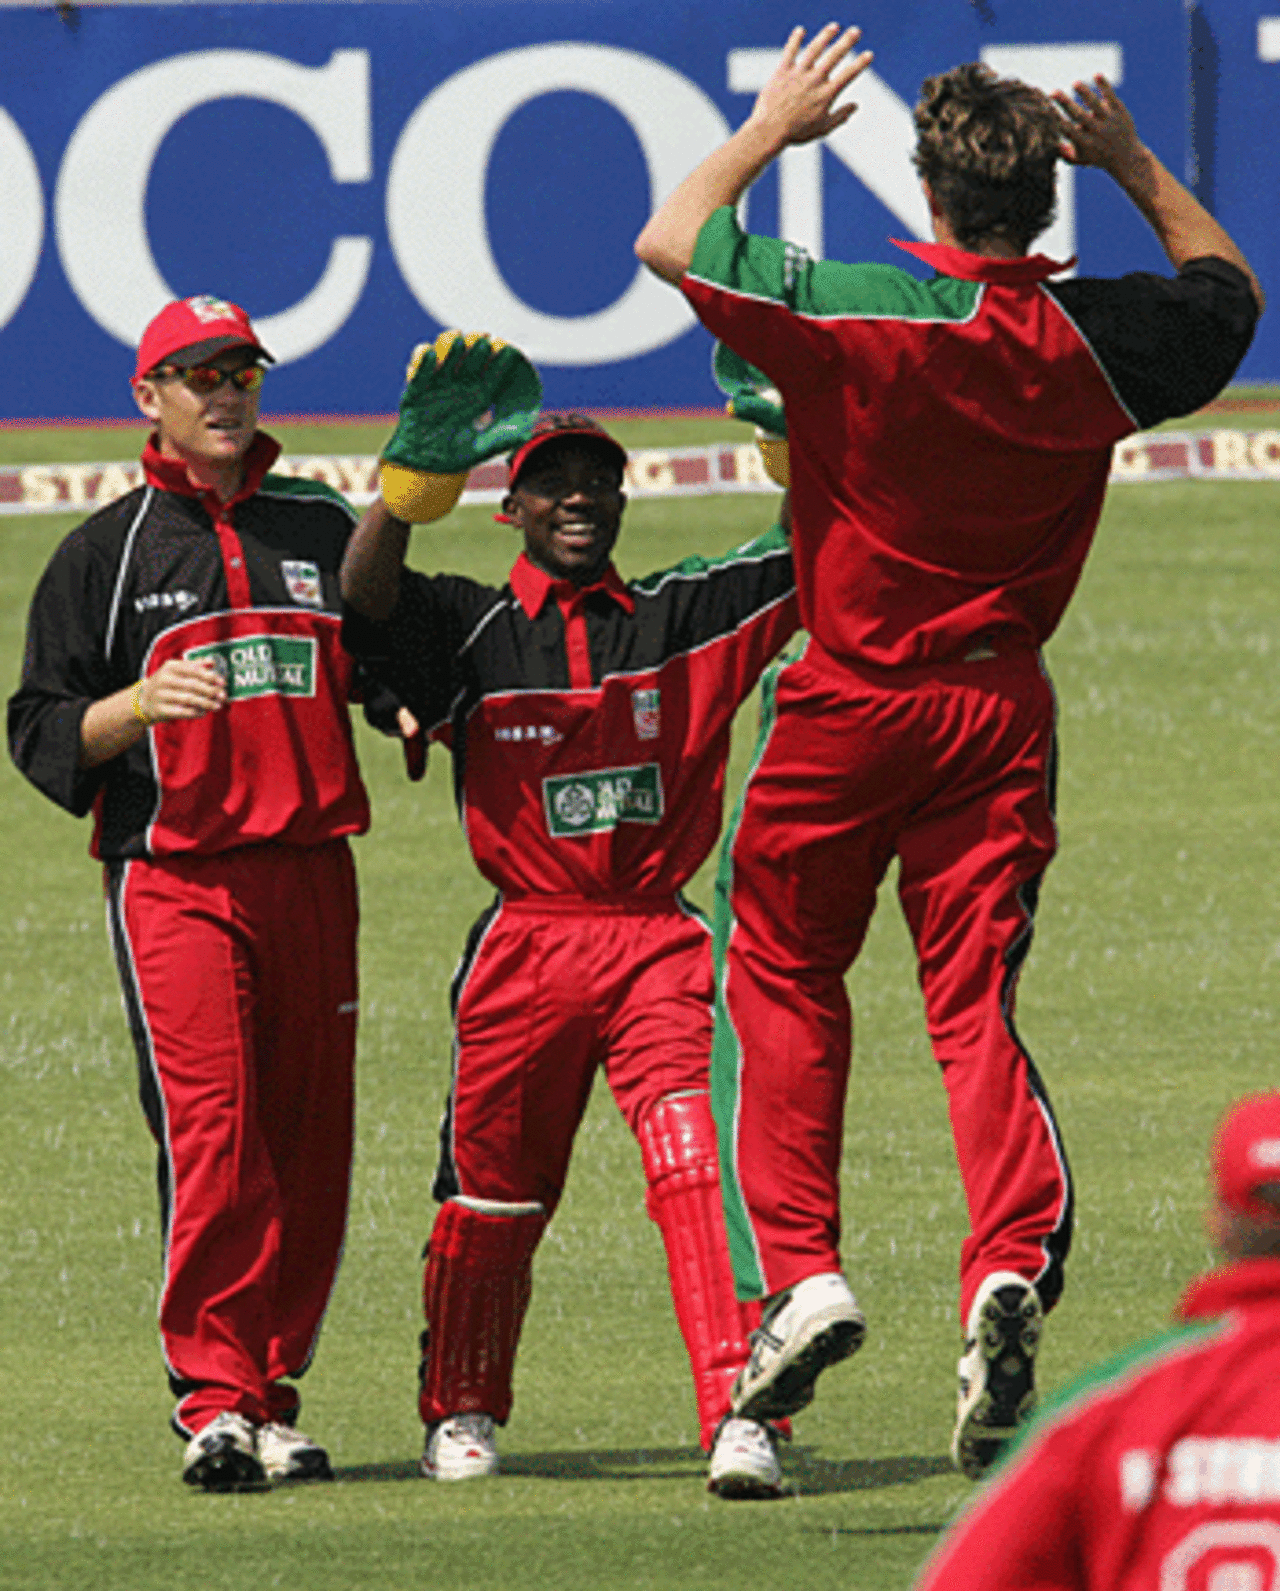 Anthony Ireland is cock-a-hoop after dismissing Sourav Ganguly, Zimbabwe v India, Harare, August 29, 2005